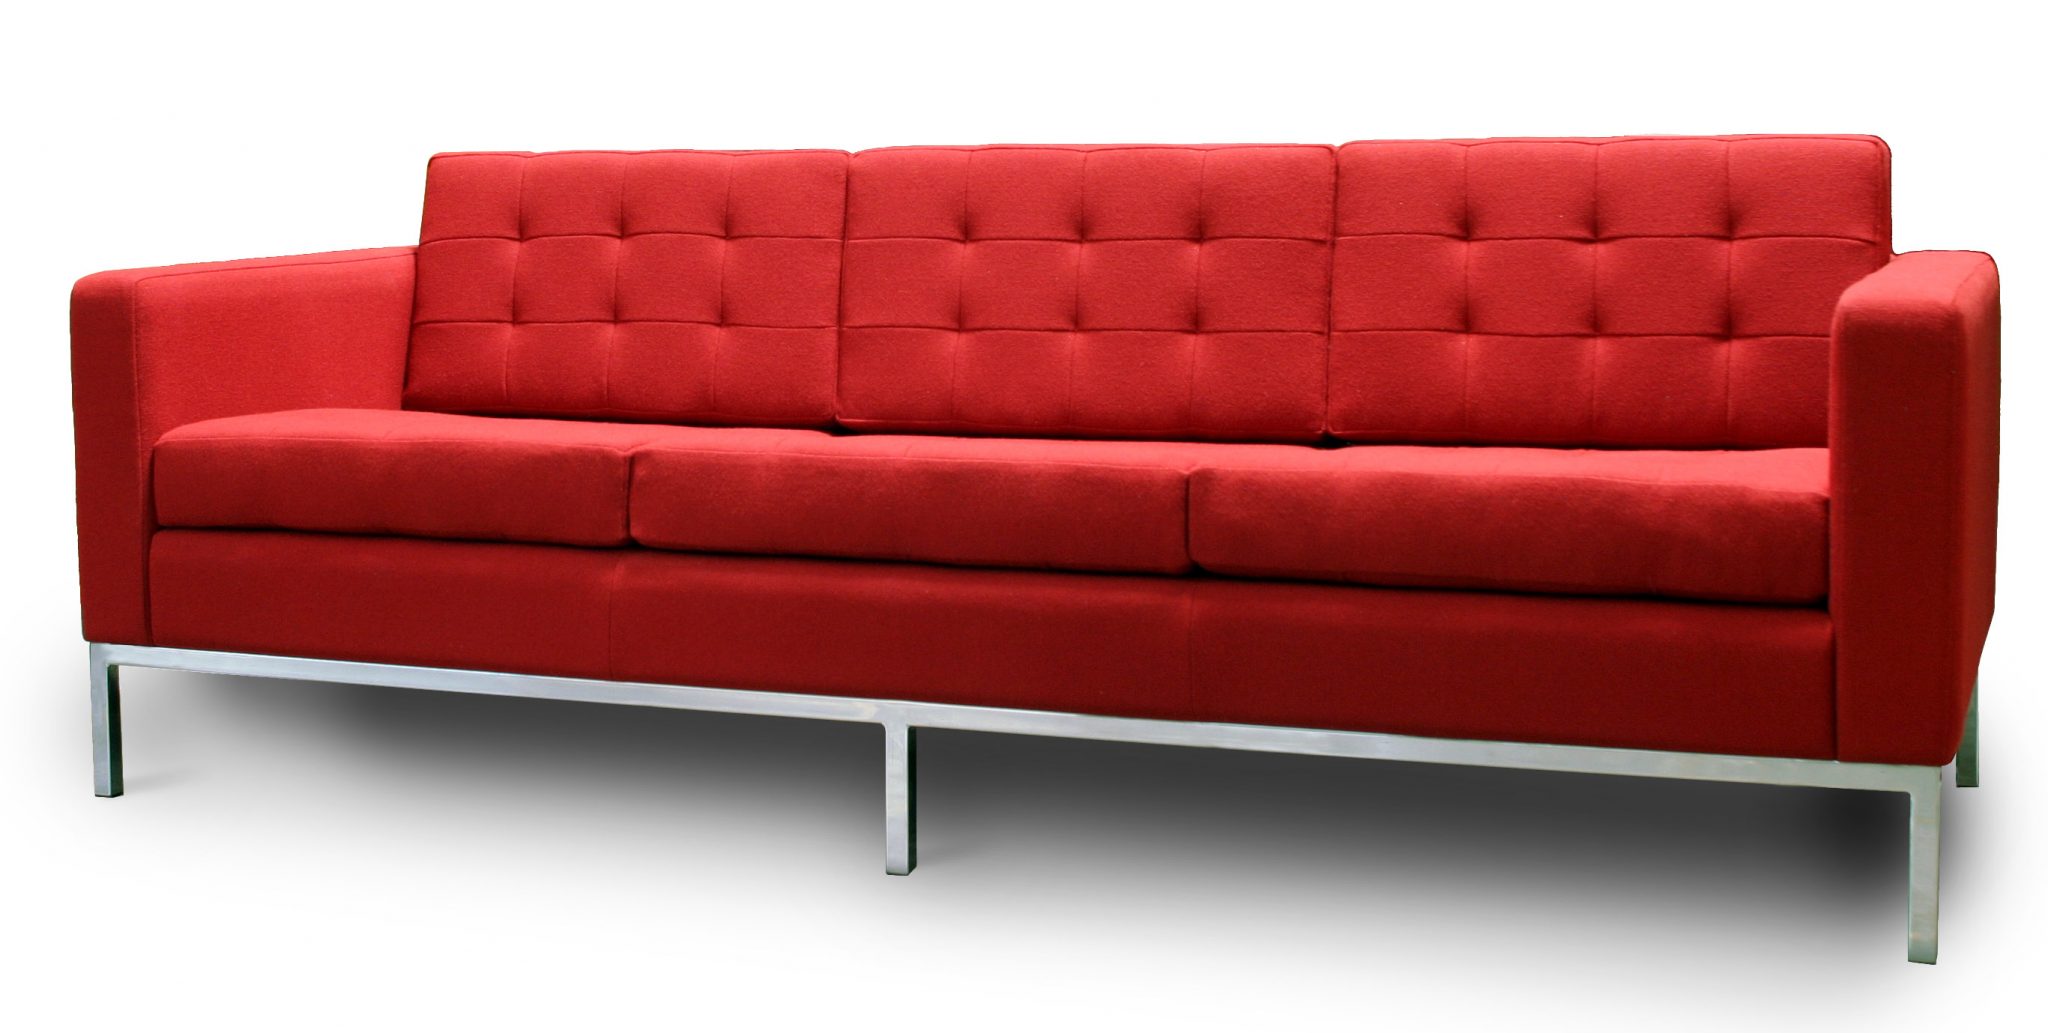 monroe 3 seater sofa bed review